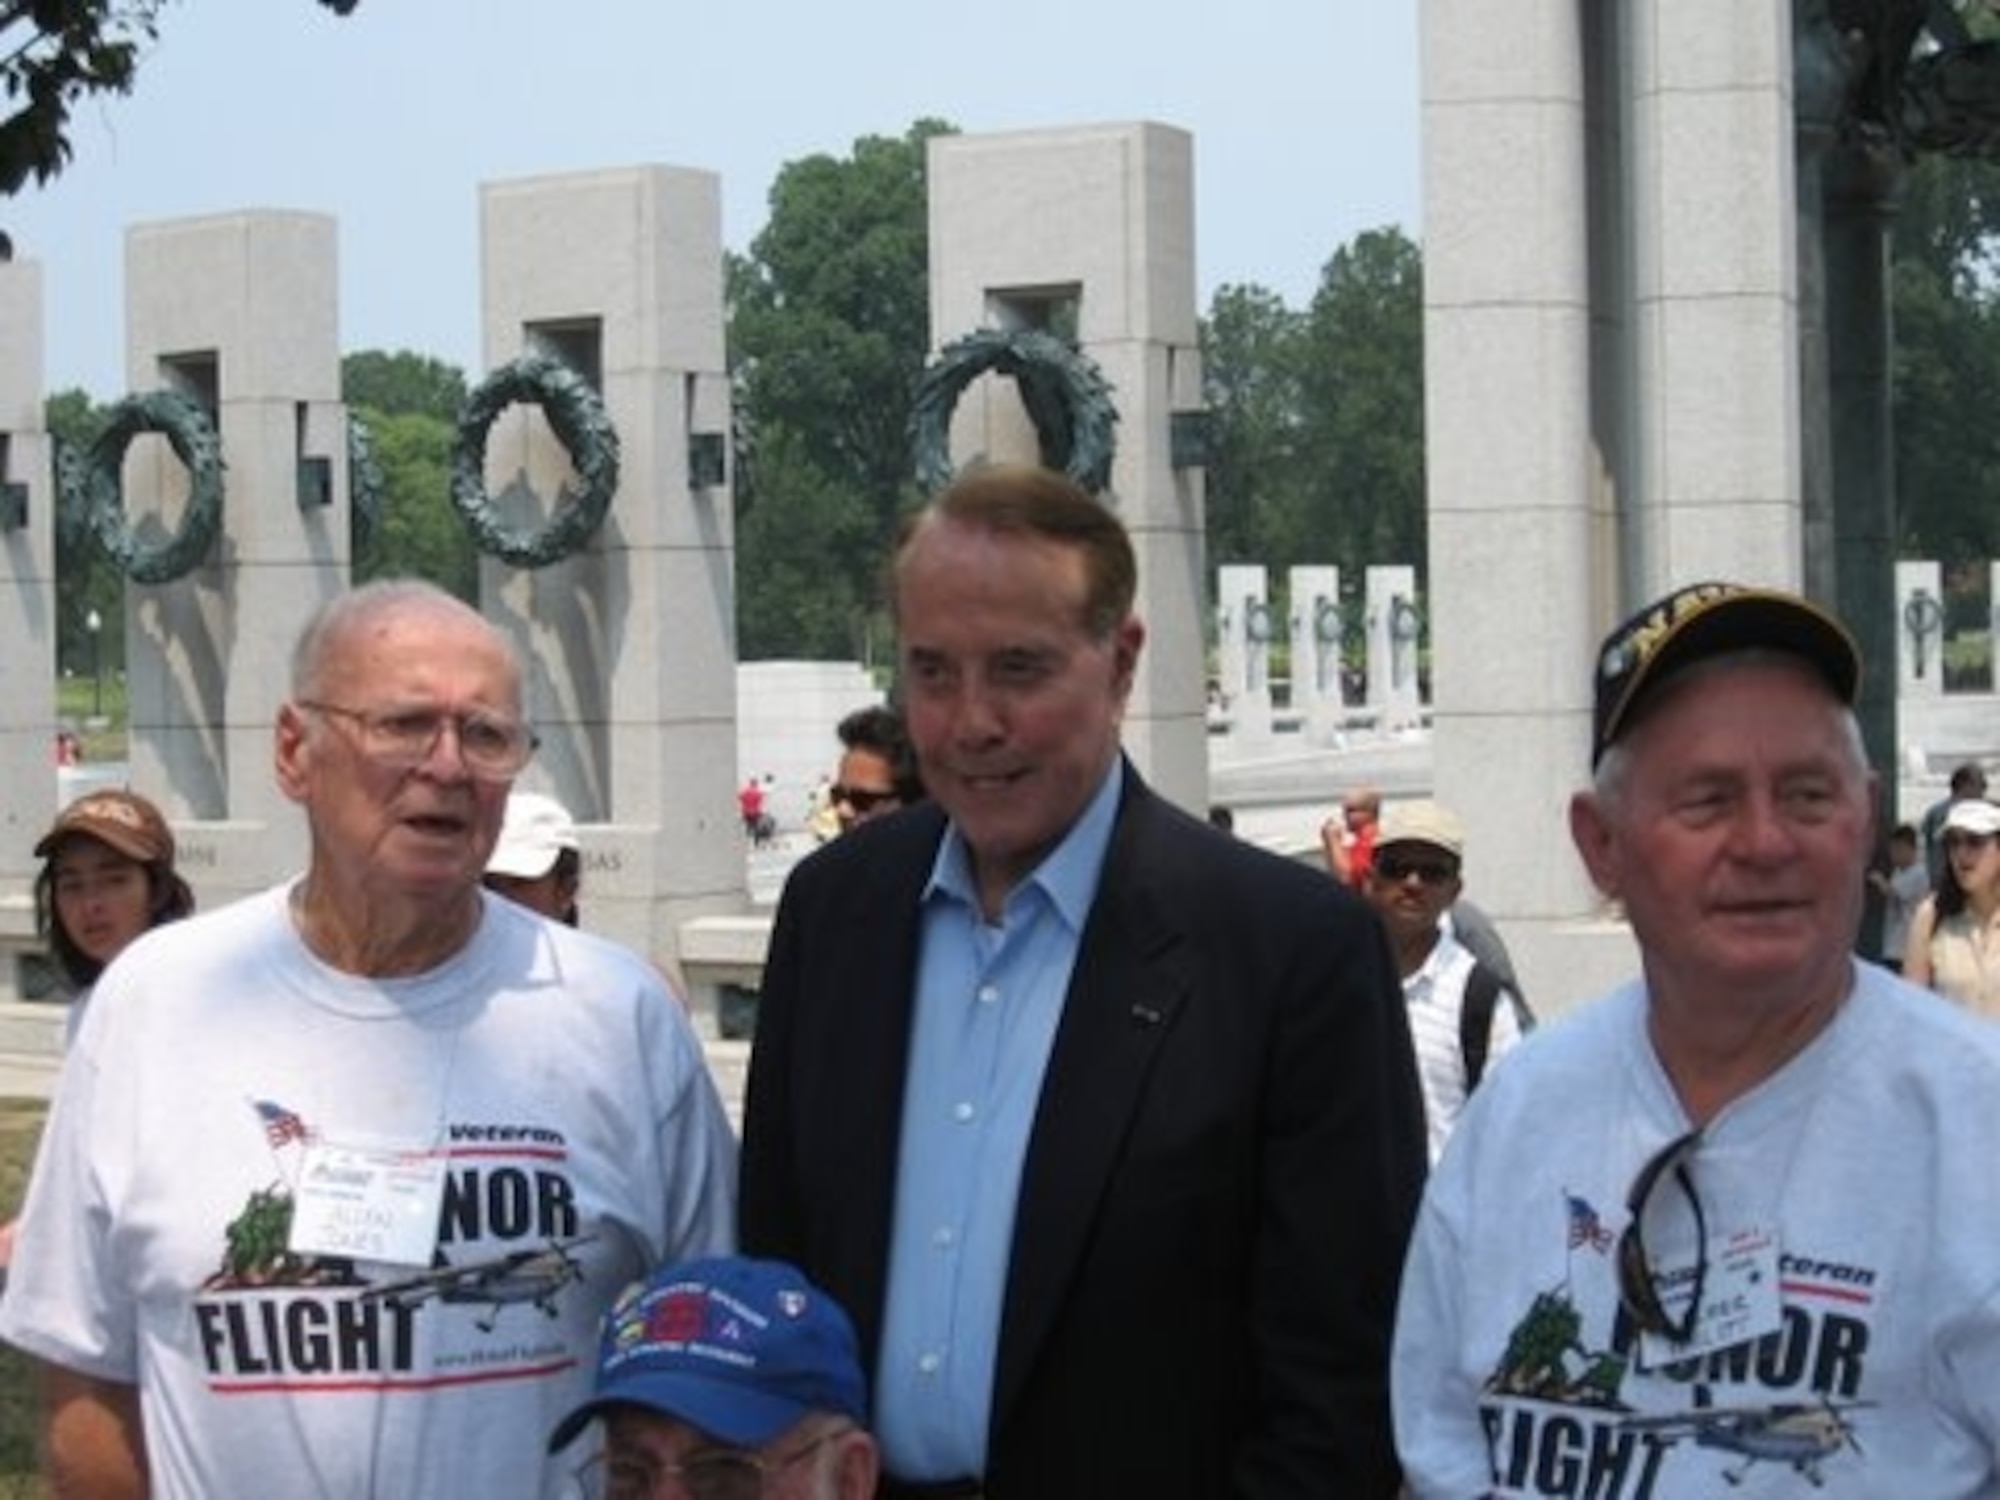 WASHINTONG D.C. - WWII veterans meet in front of the WWII Memorial in Washington D.C.  The group is part of an Honor Flight that flys WWII veterans to Washington D.C. so they can see the memorial in person.  Alan Jones (left), and Elmer Willett (right), meet with former Senator Bob Dole in front of the WWII Memorial in Washington D.C. (U.S. Air Force photo/Charlie Miller)